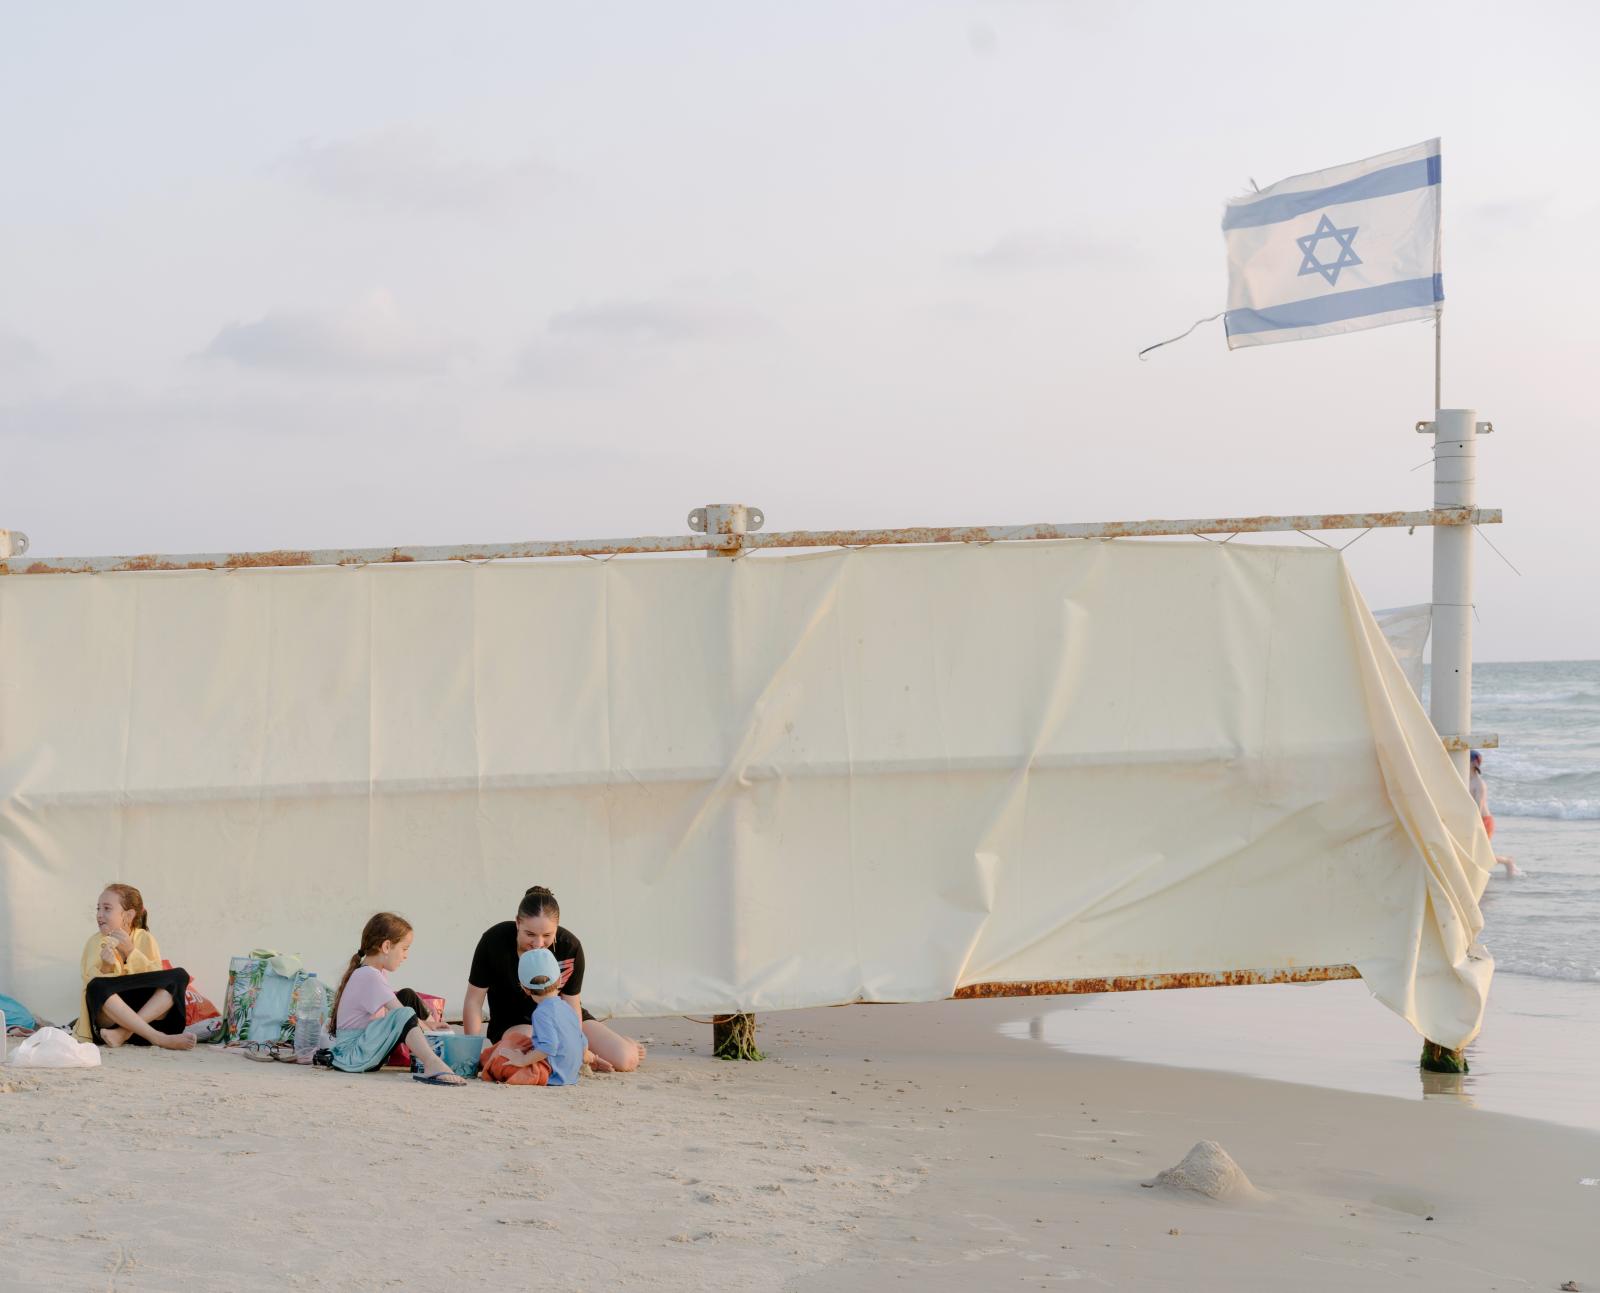  A family sitting by a sheet of...h the Israeli flag is hoisted. 